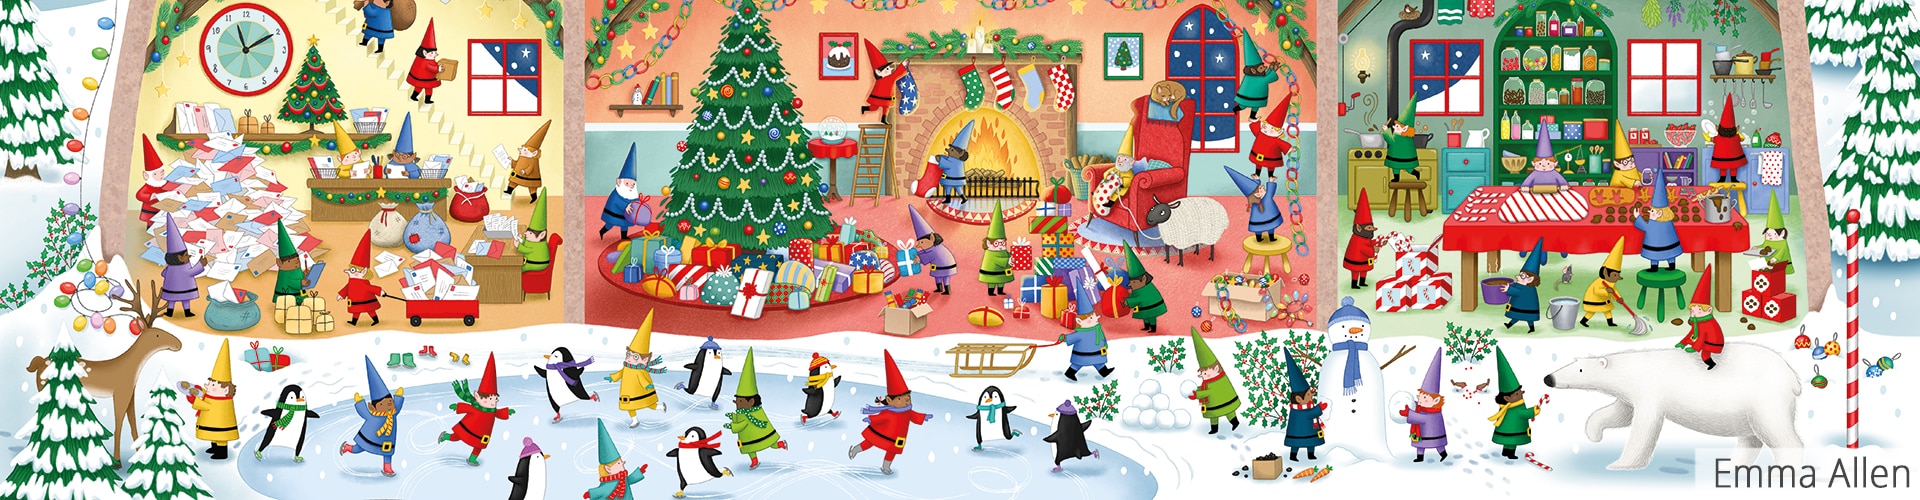 Detail of Santa's grotto jigsaw puzzle design with lots of elves by Emma Allen illustrator for art licensing